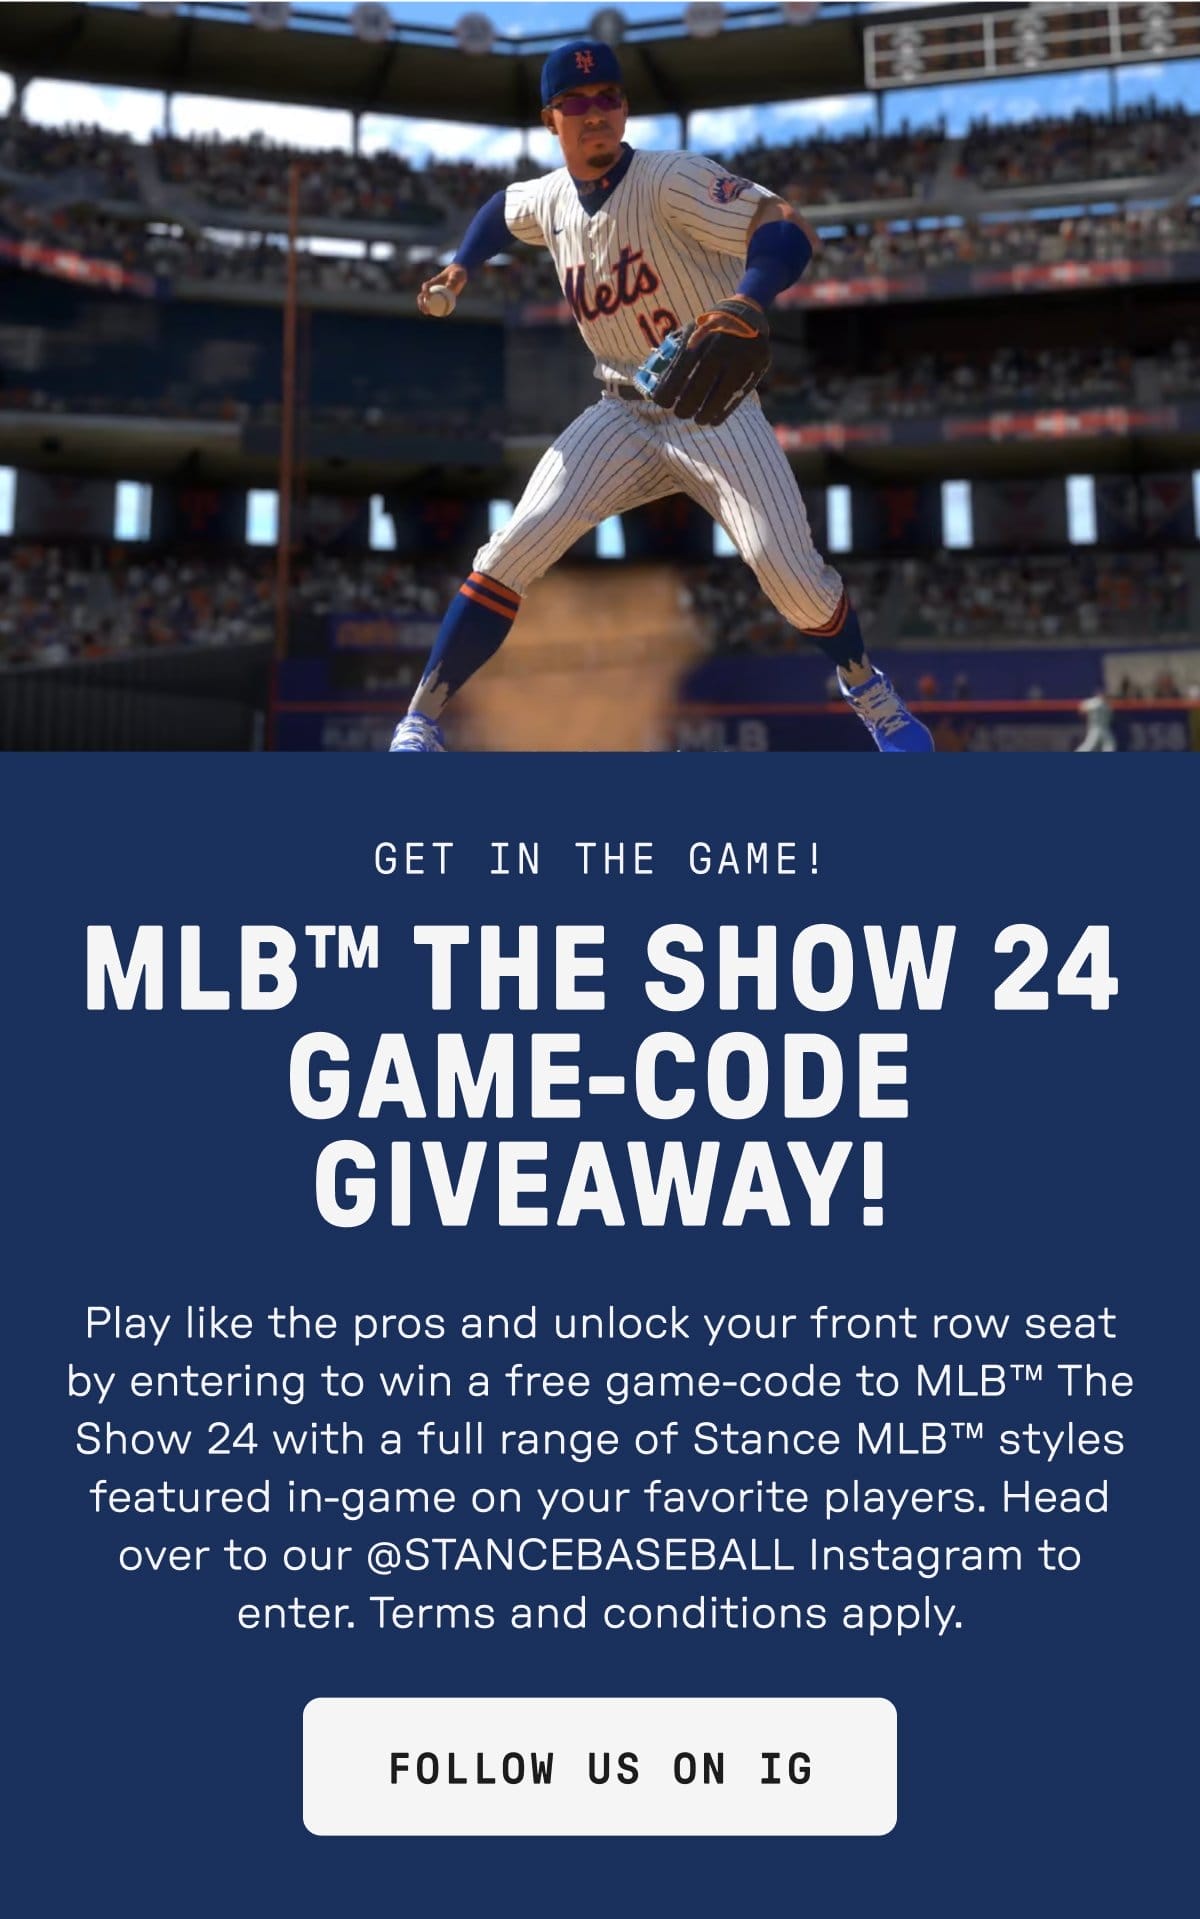 MLB THE SHOW CODE GIVEAWAY